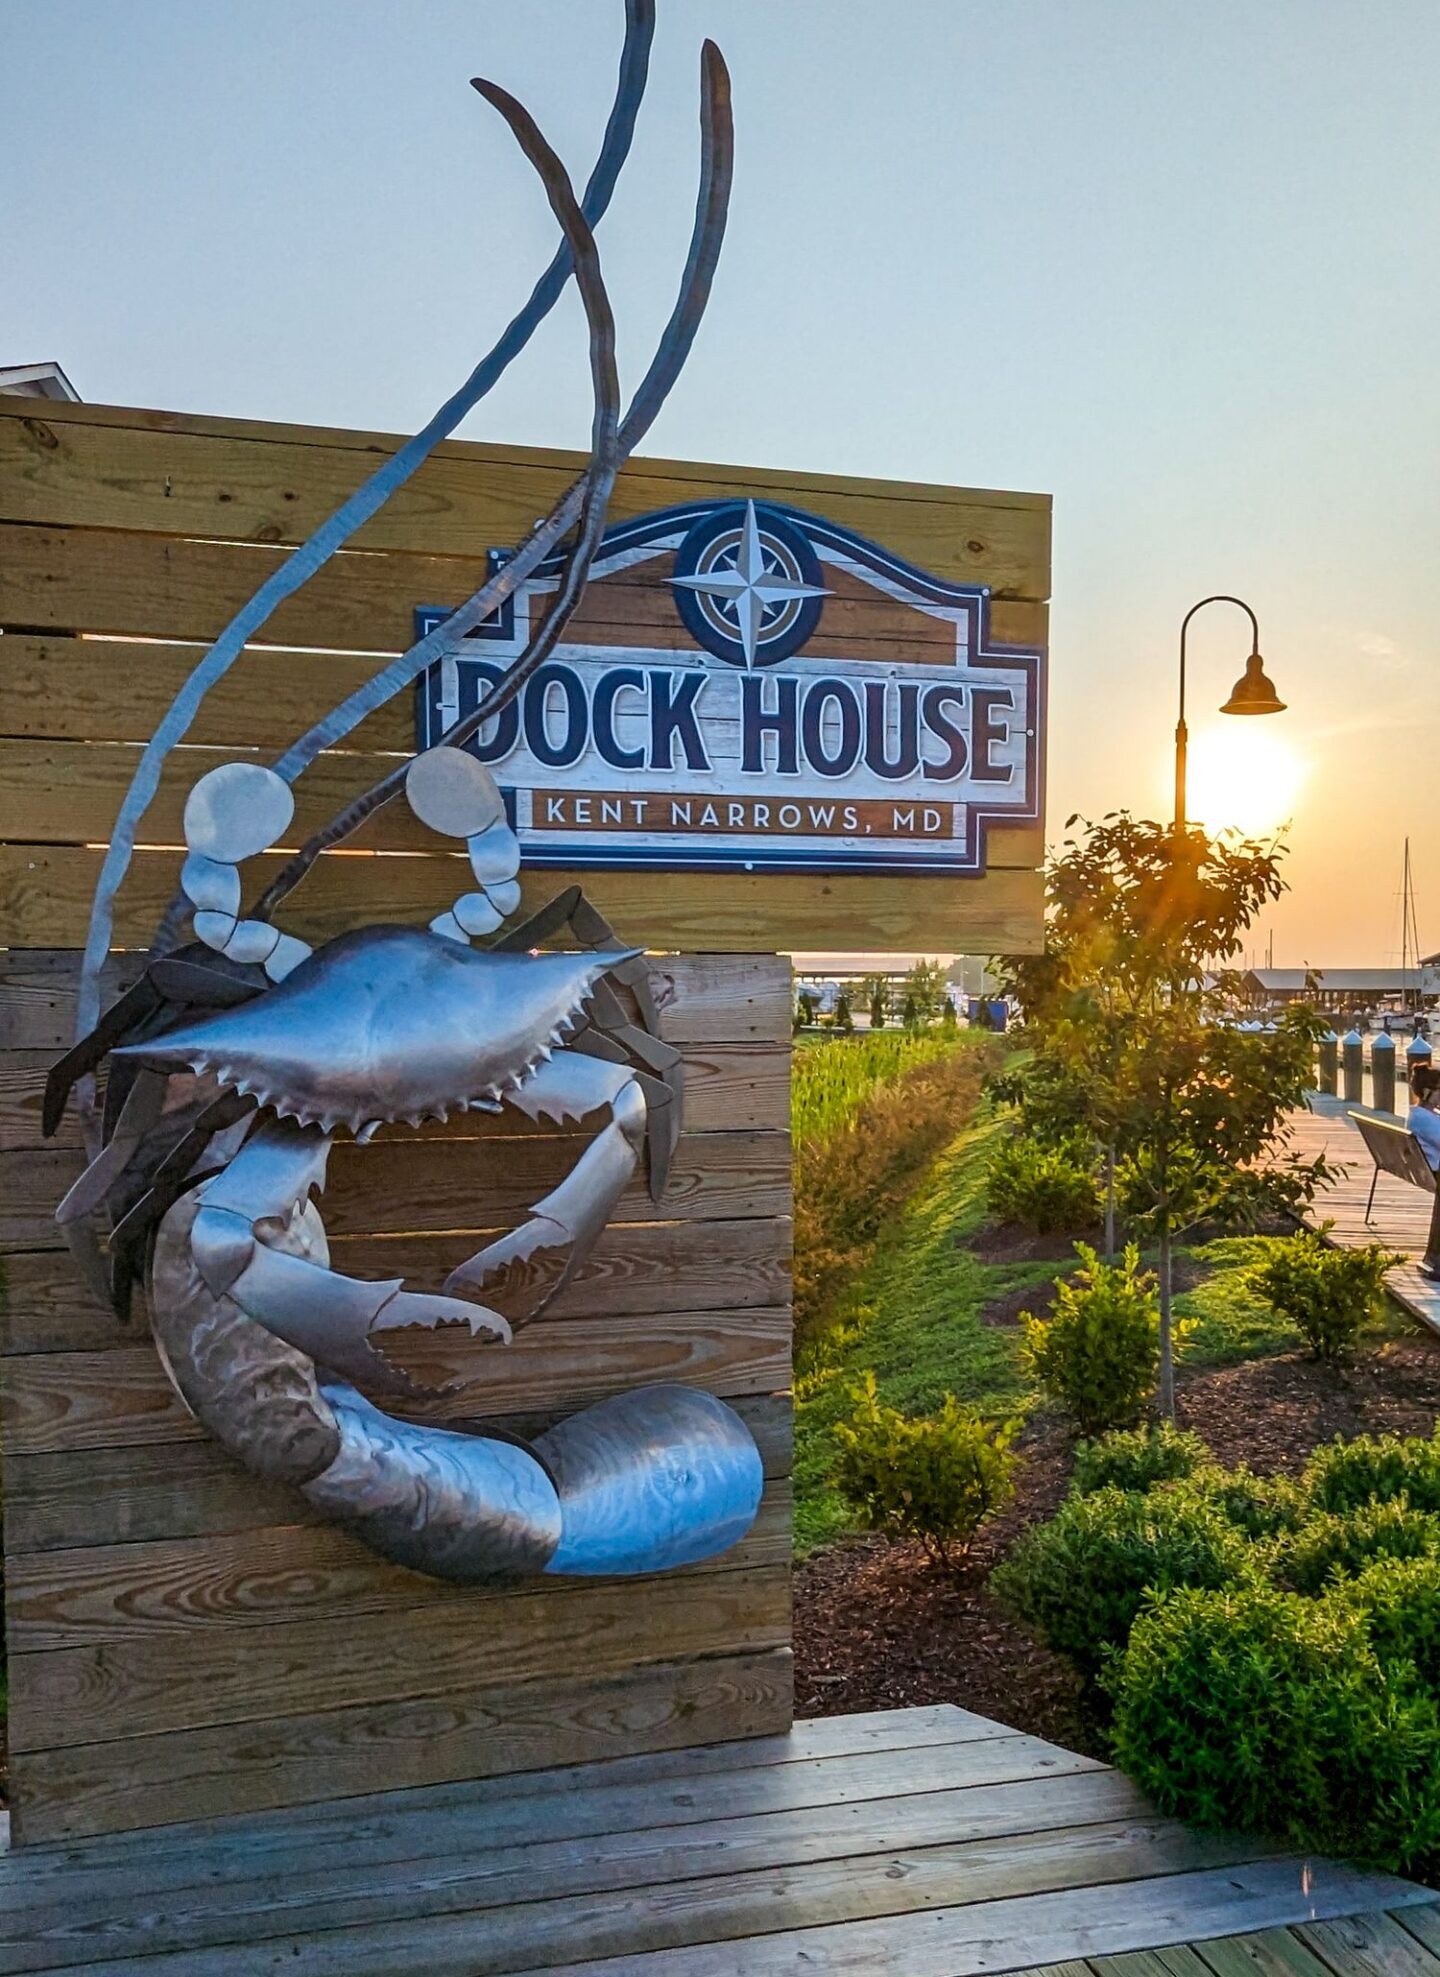 The front sign of Dock House restaurant with a giant blue crab on wood.